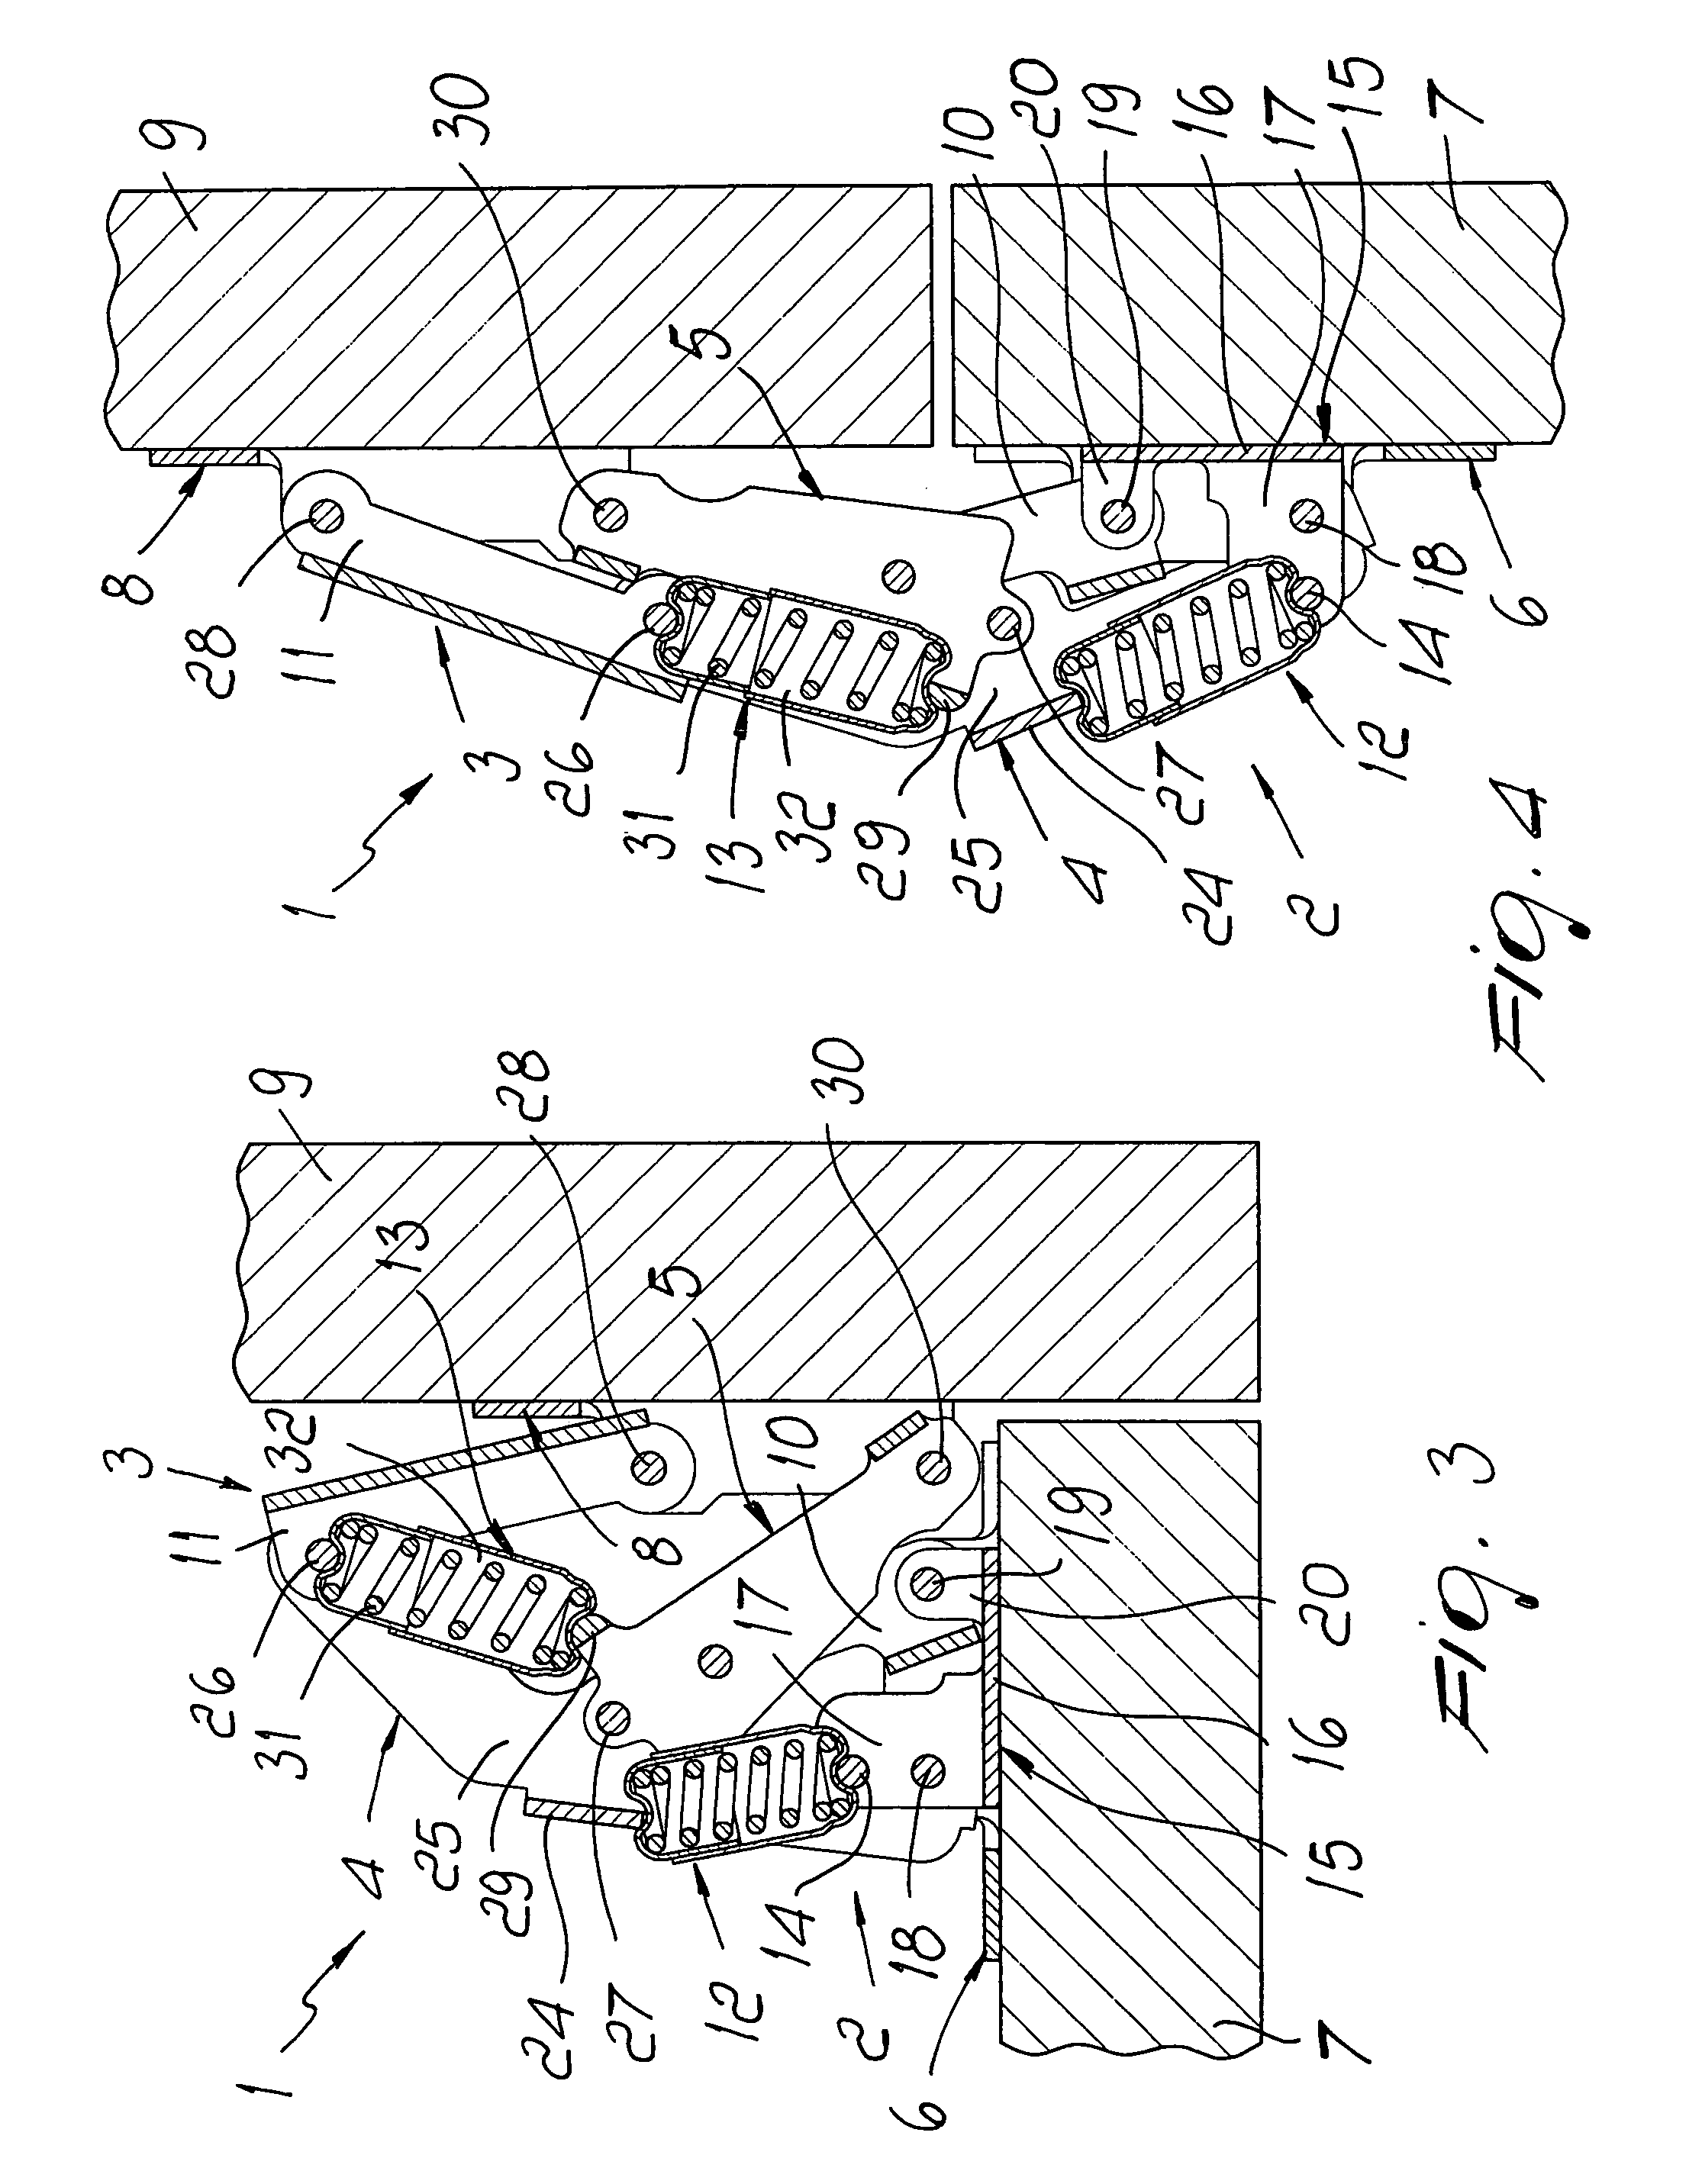 Snap hinge for supporting a closure element